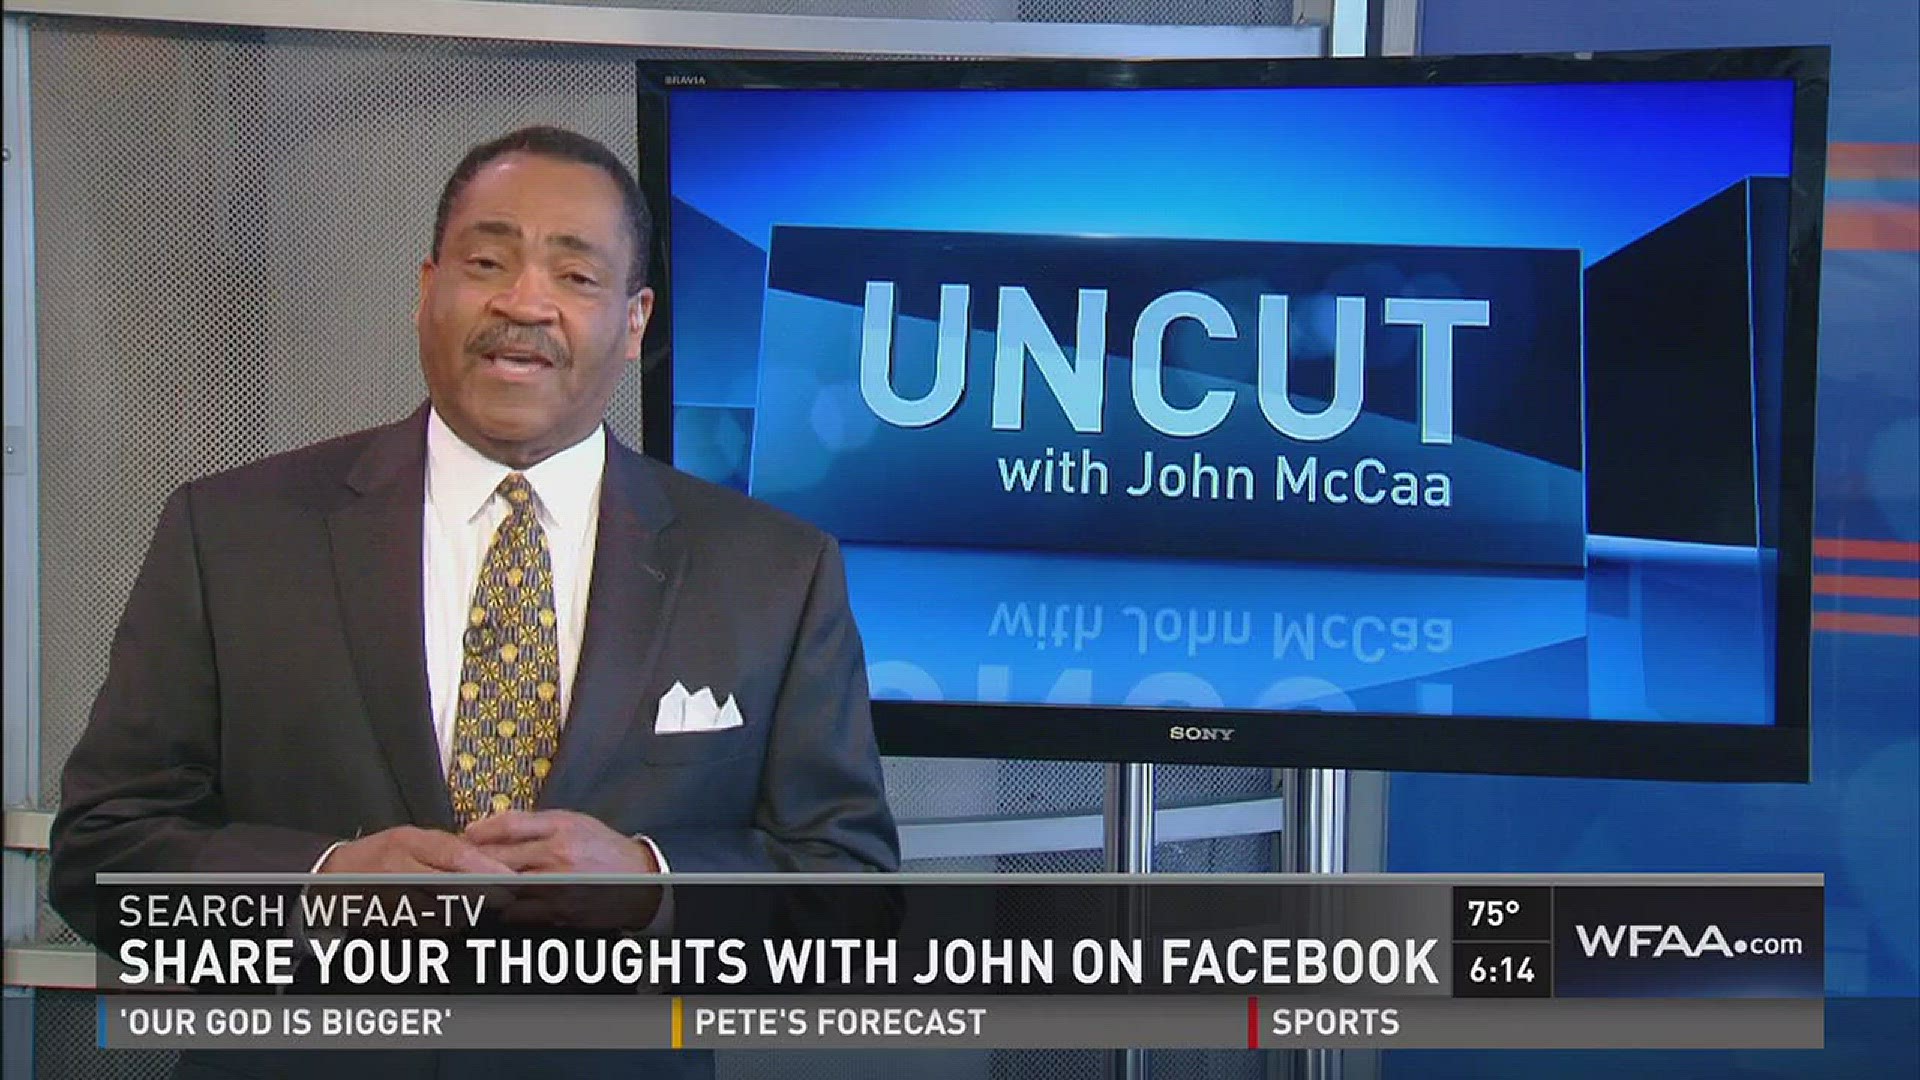 News 8's John McCaa shares his view on the week's top stories in his Uncut commentaries.